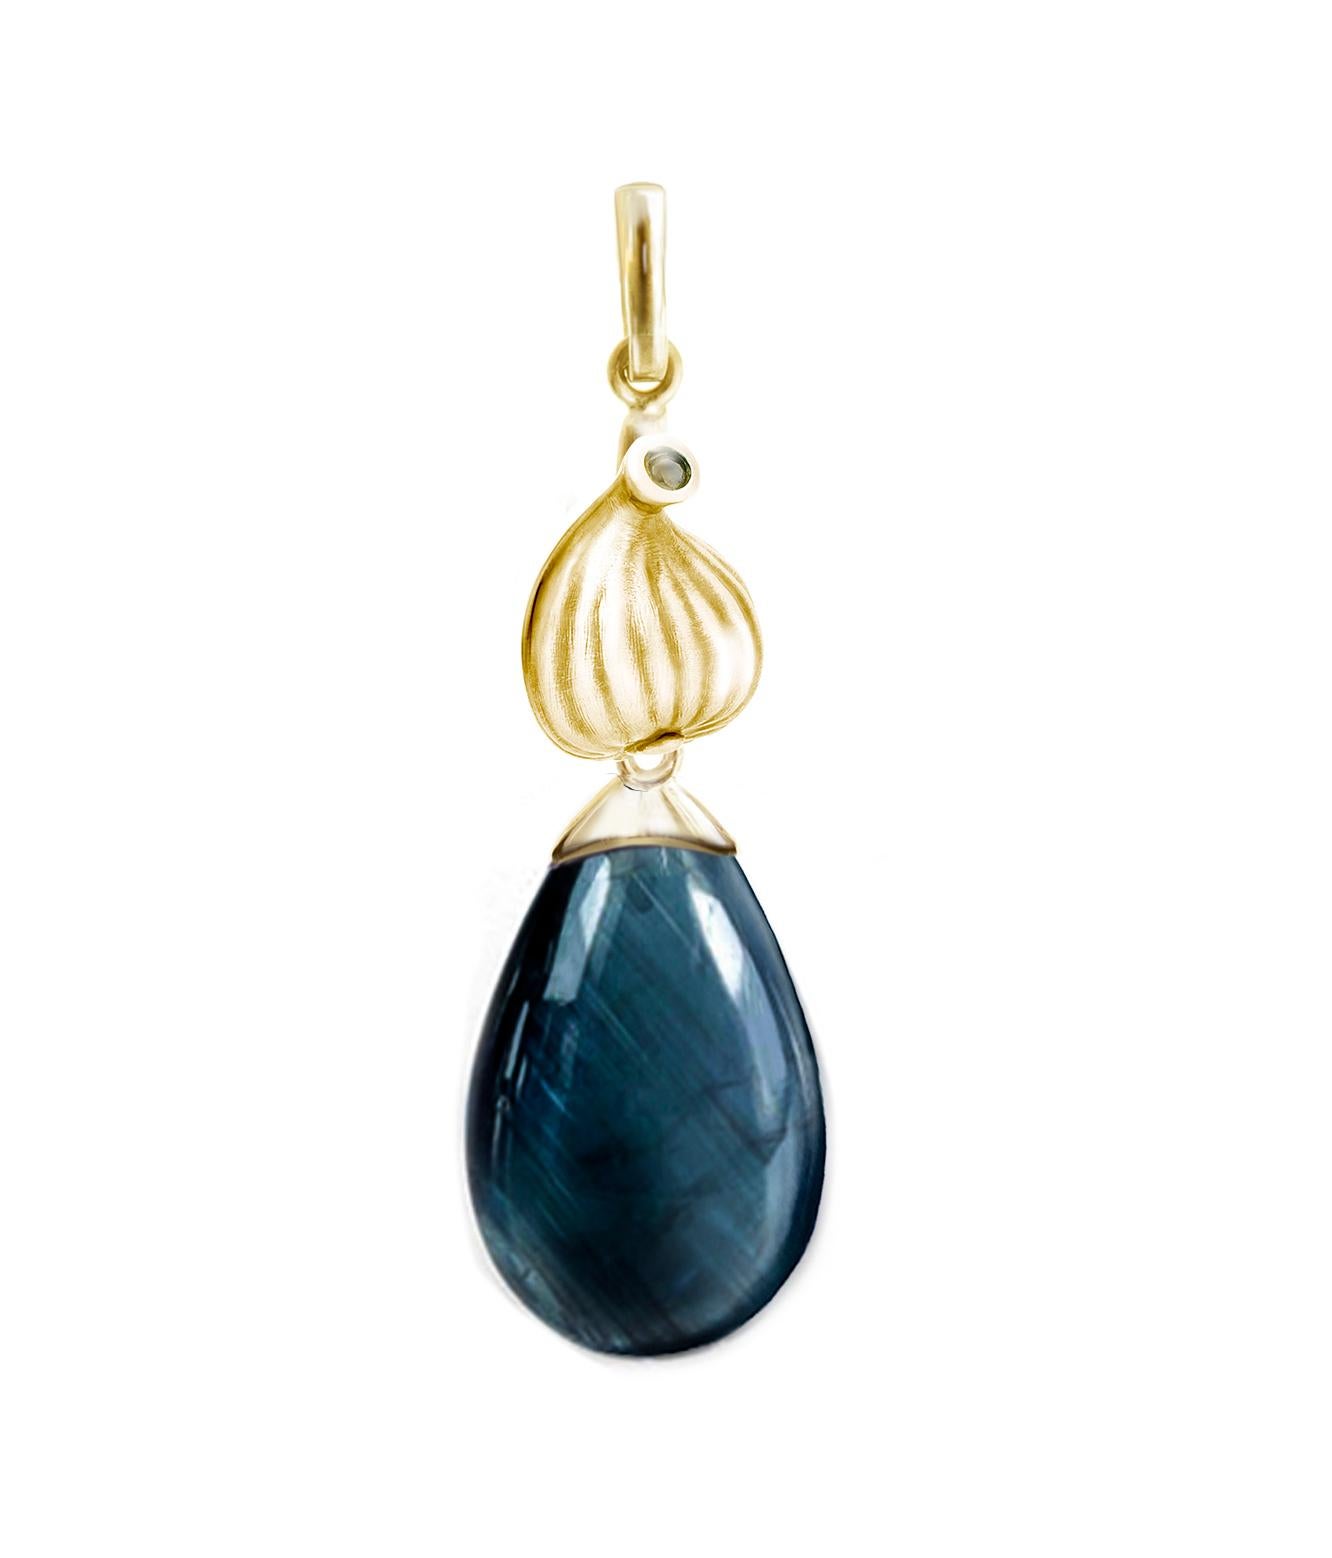 These contemporary drop earrings feature 18 karat yellow gold with natural vivid Indicolite tourmalines (17.5x10.5x6 mm each, 18.7 carats in total) and round diamonds. The Fig collection was showcased in a Vogue UA review and was designed by an